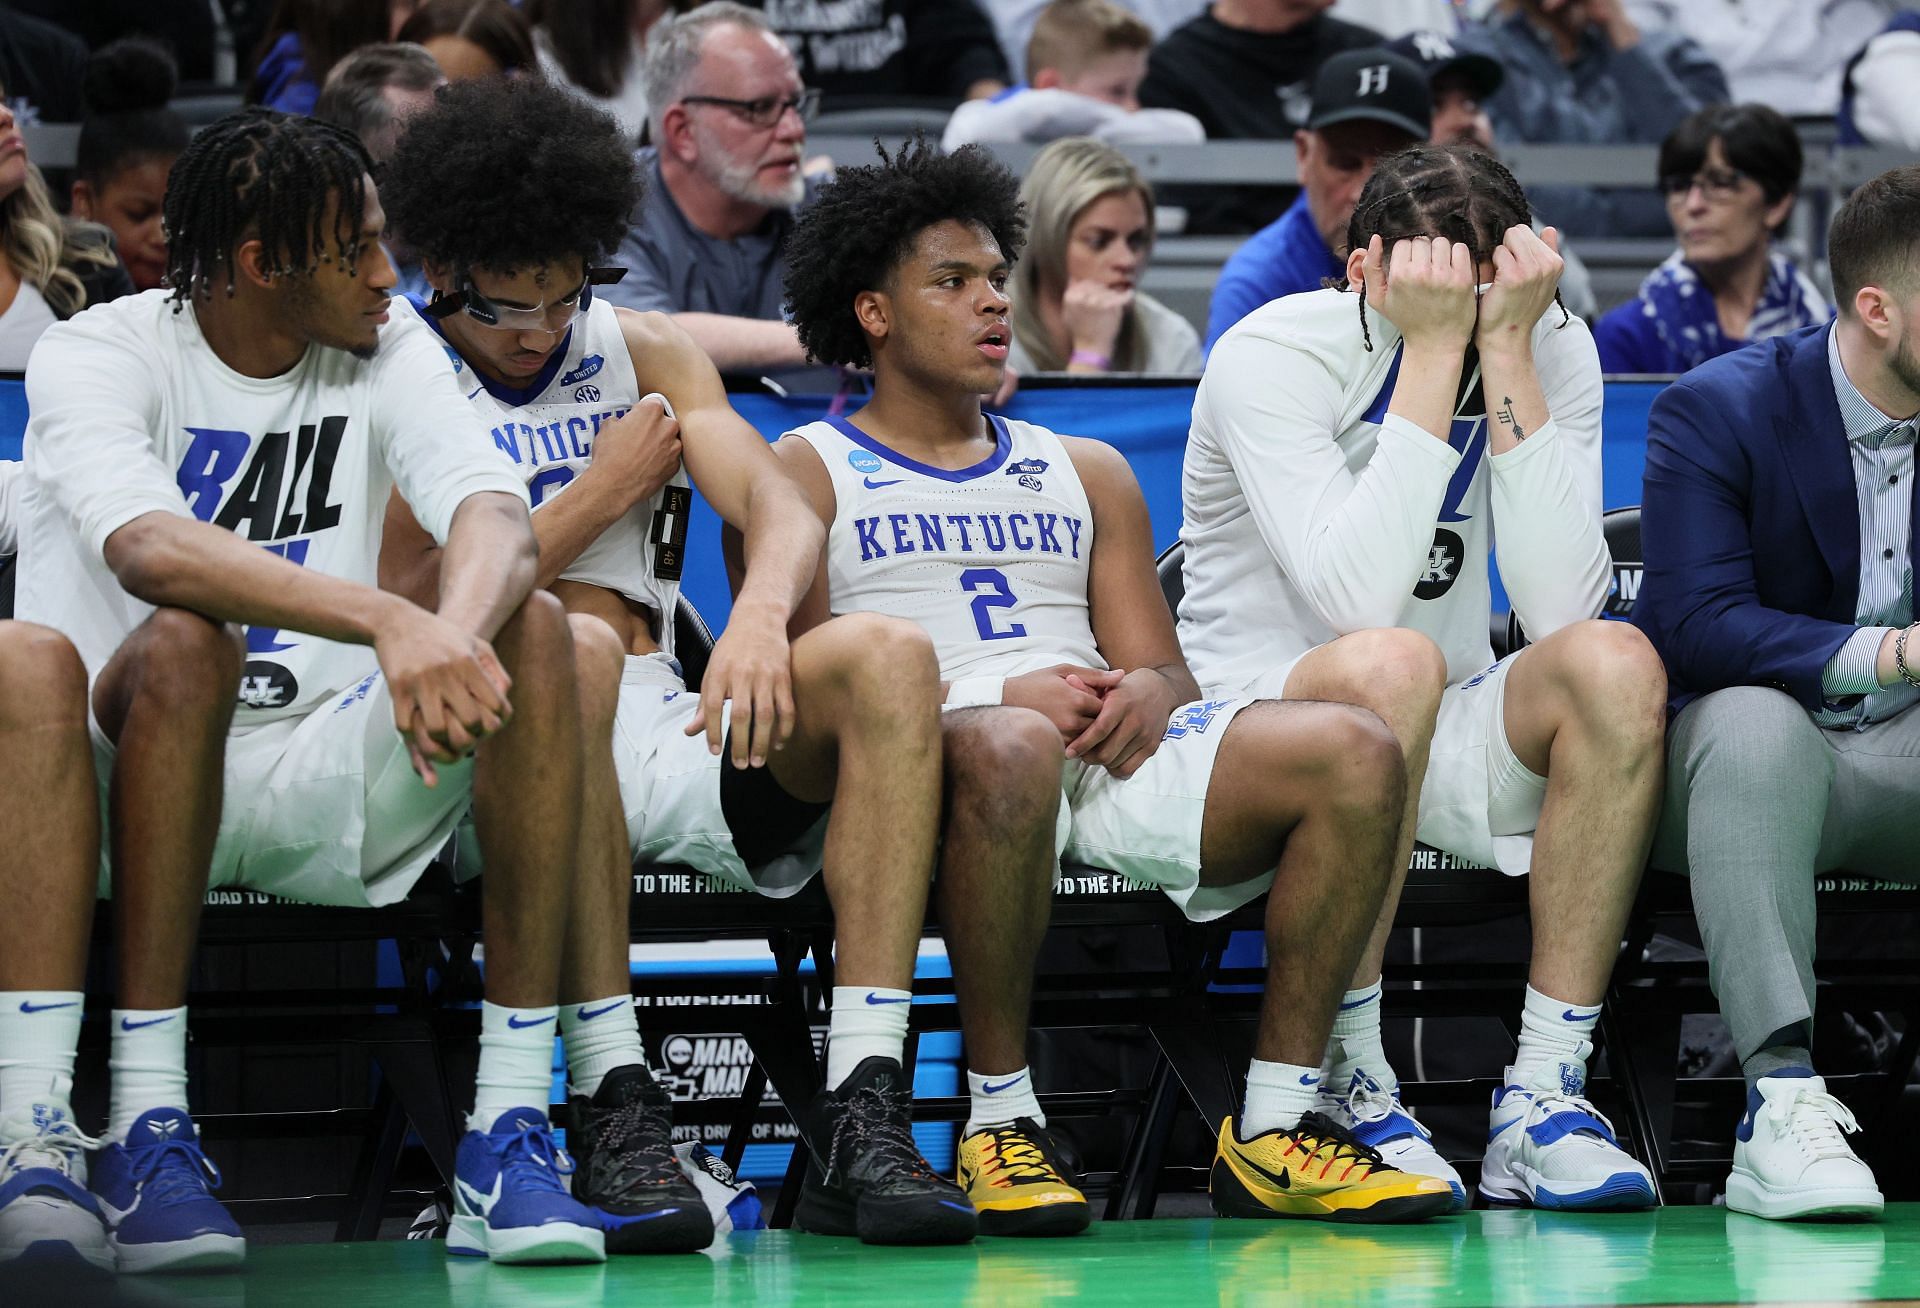 The Wildcats&#039; season ended in disappointment after a loss to the Saint Peter&#039;s Peacocks.